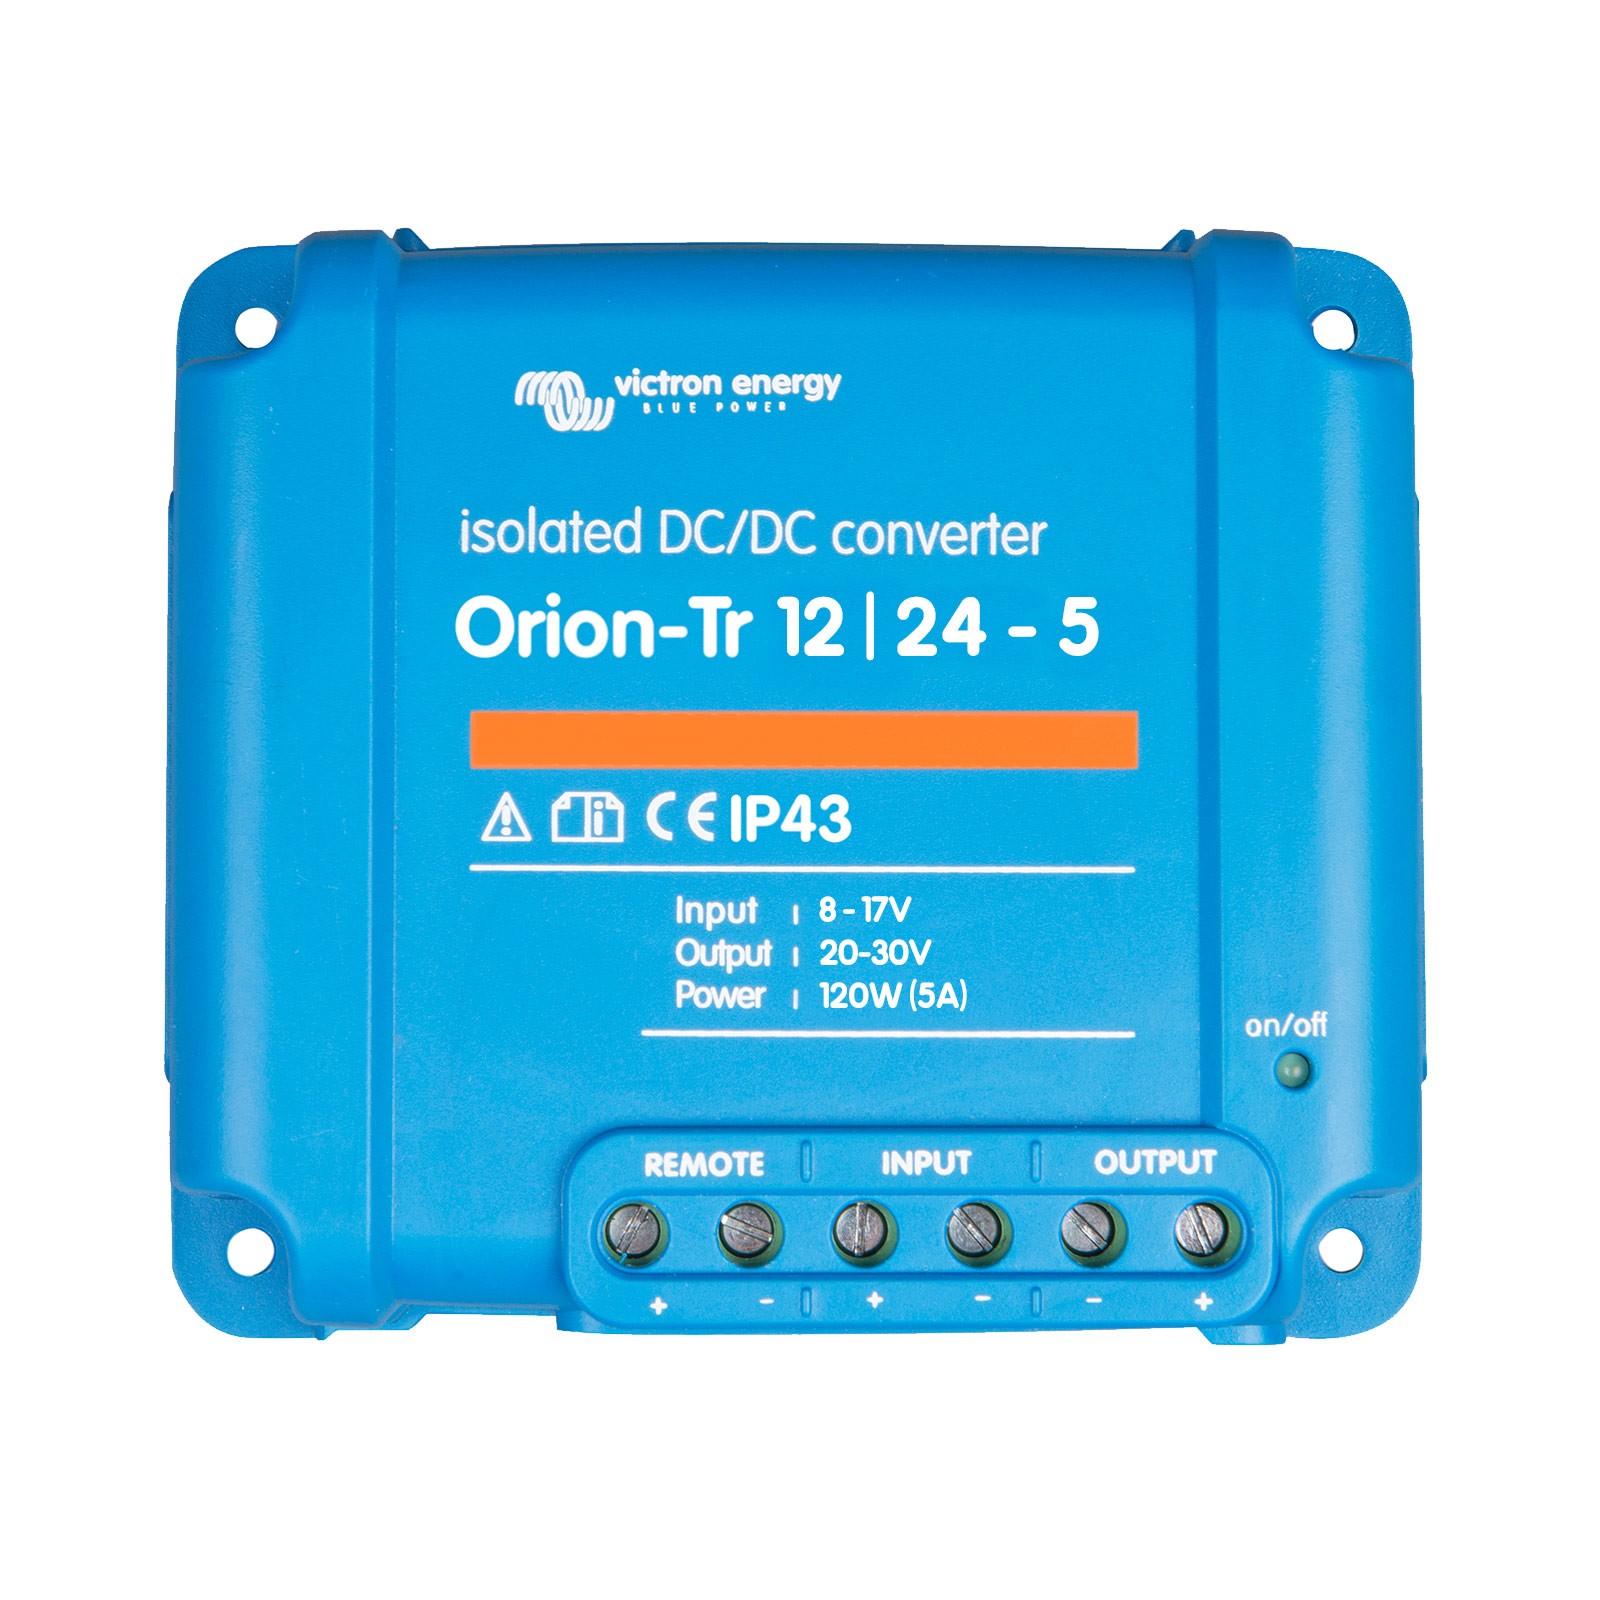 Orion-Tr 12/24-5 A Victron Energy isolated converter